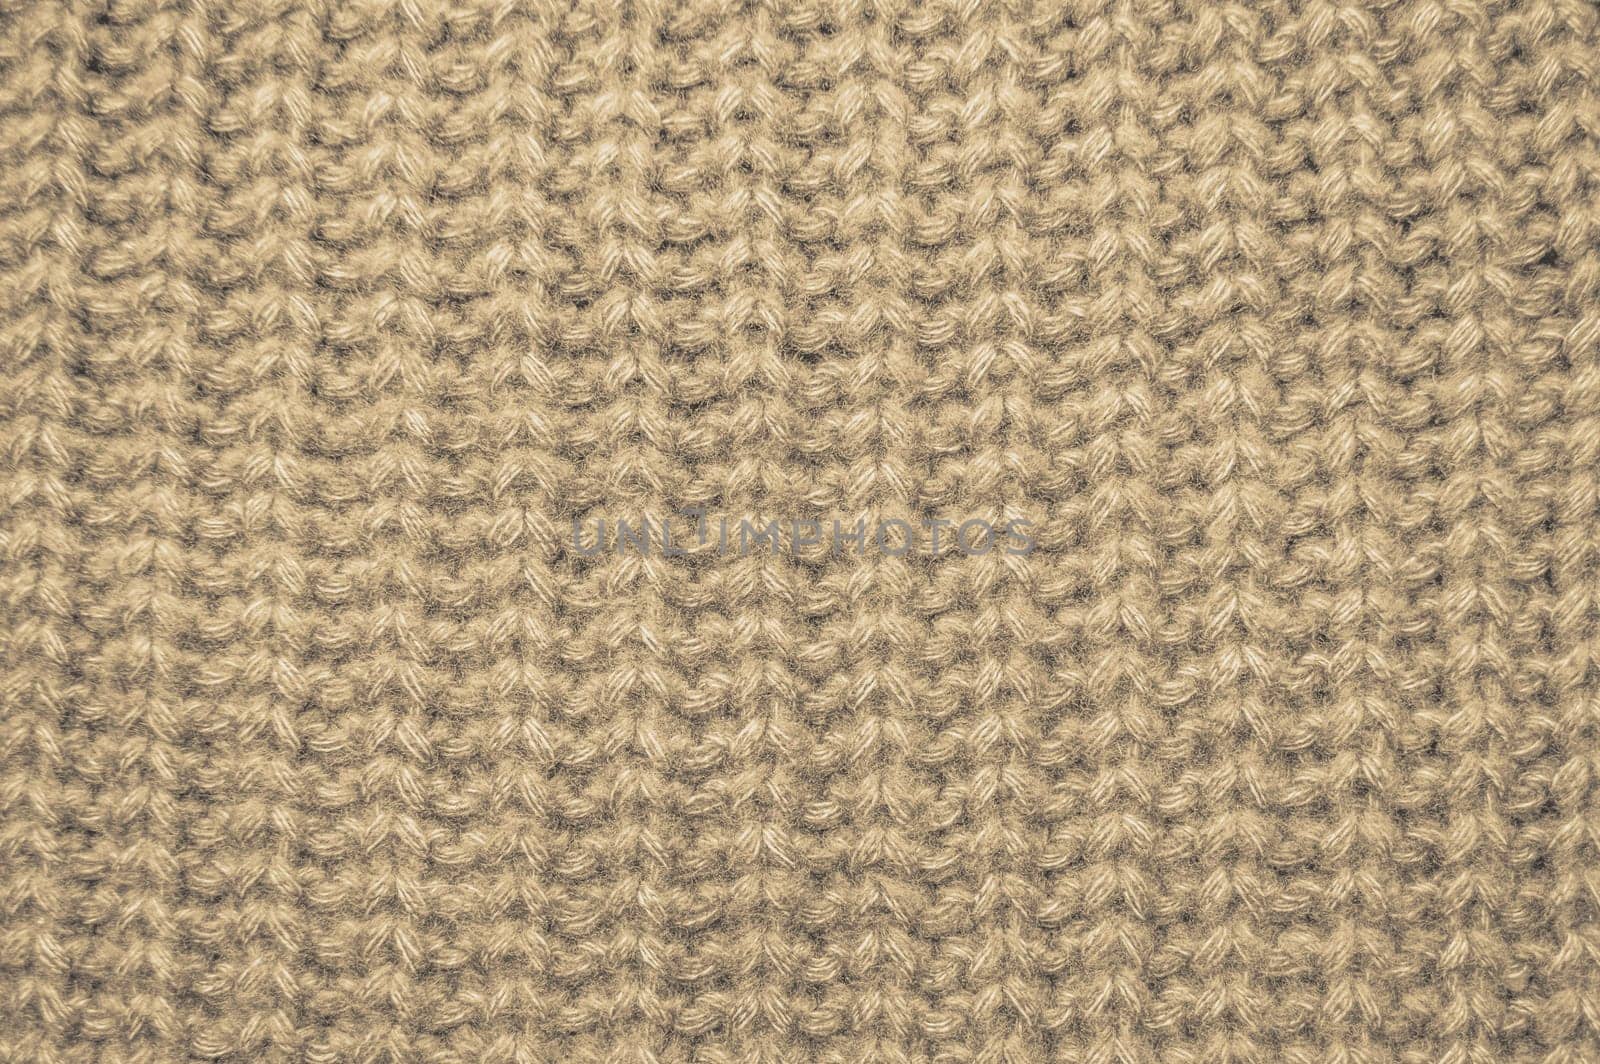 Knitted Texture. Vintage Woven Texture. Jacquard Xmas Background. Woolen Knitting Texture. Macro Thread. Nordic Warm Blanket. Soft Plaid Wallpaper. Structure Knitted Texture.